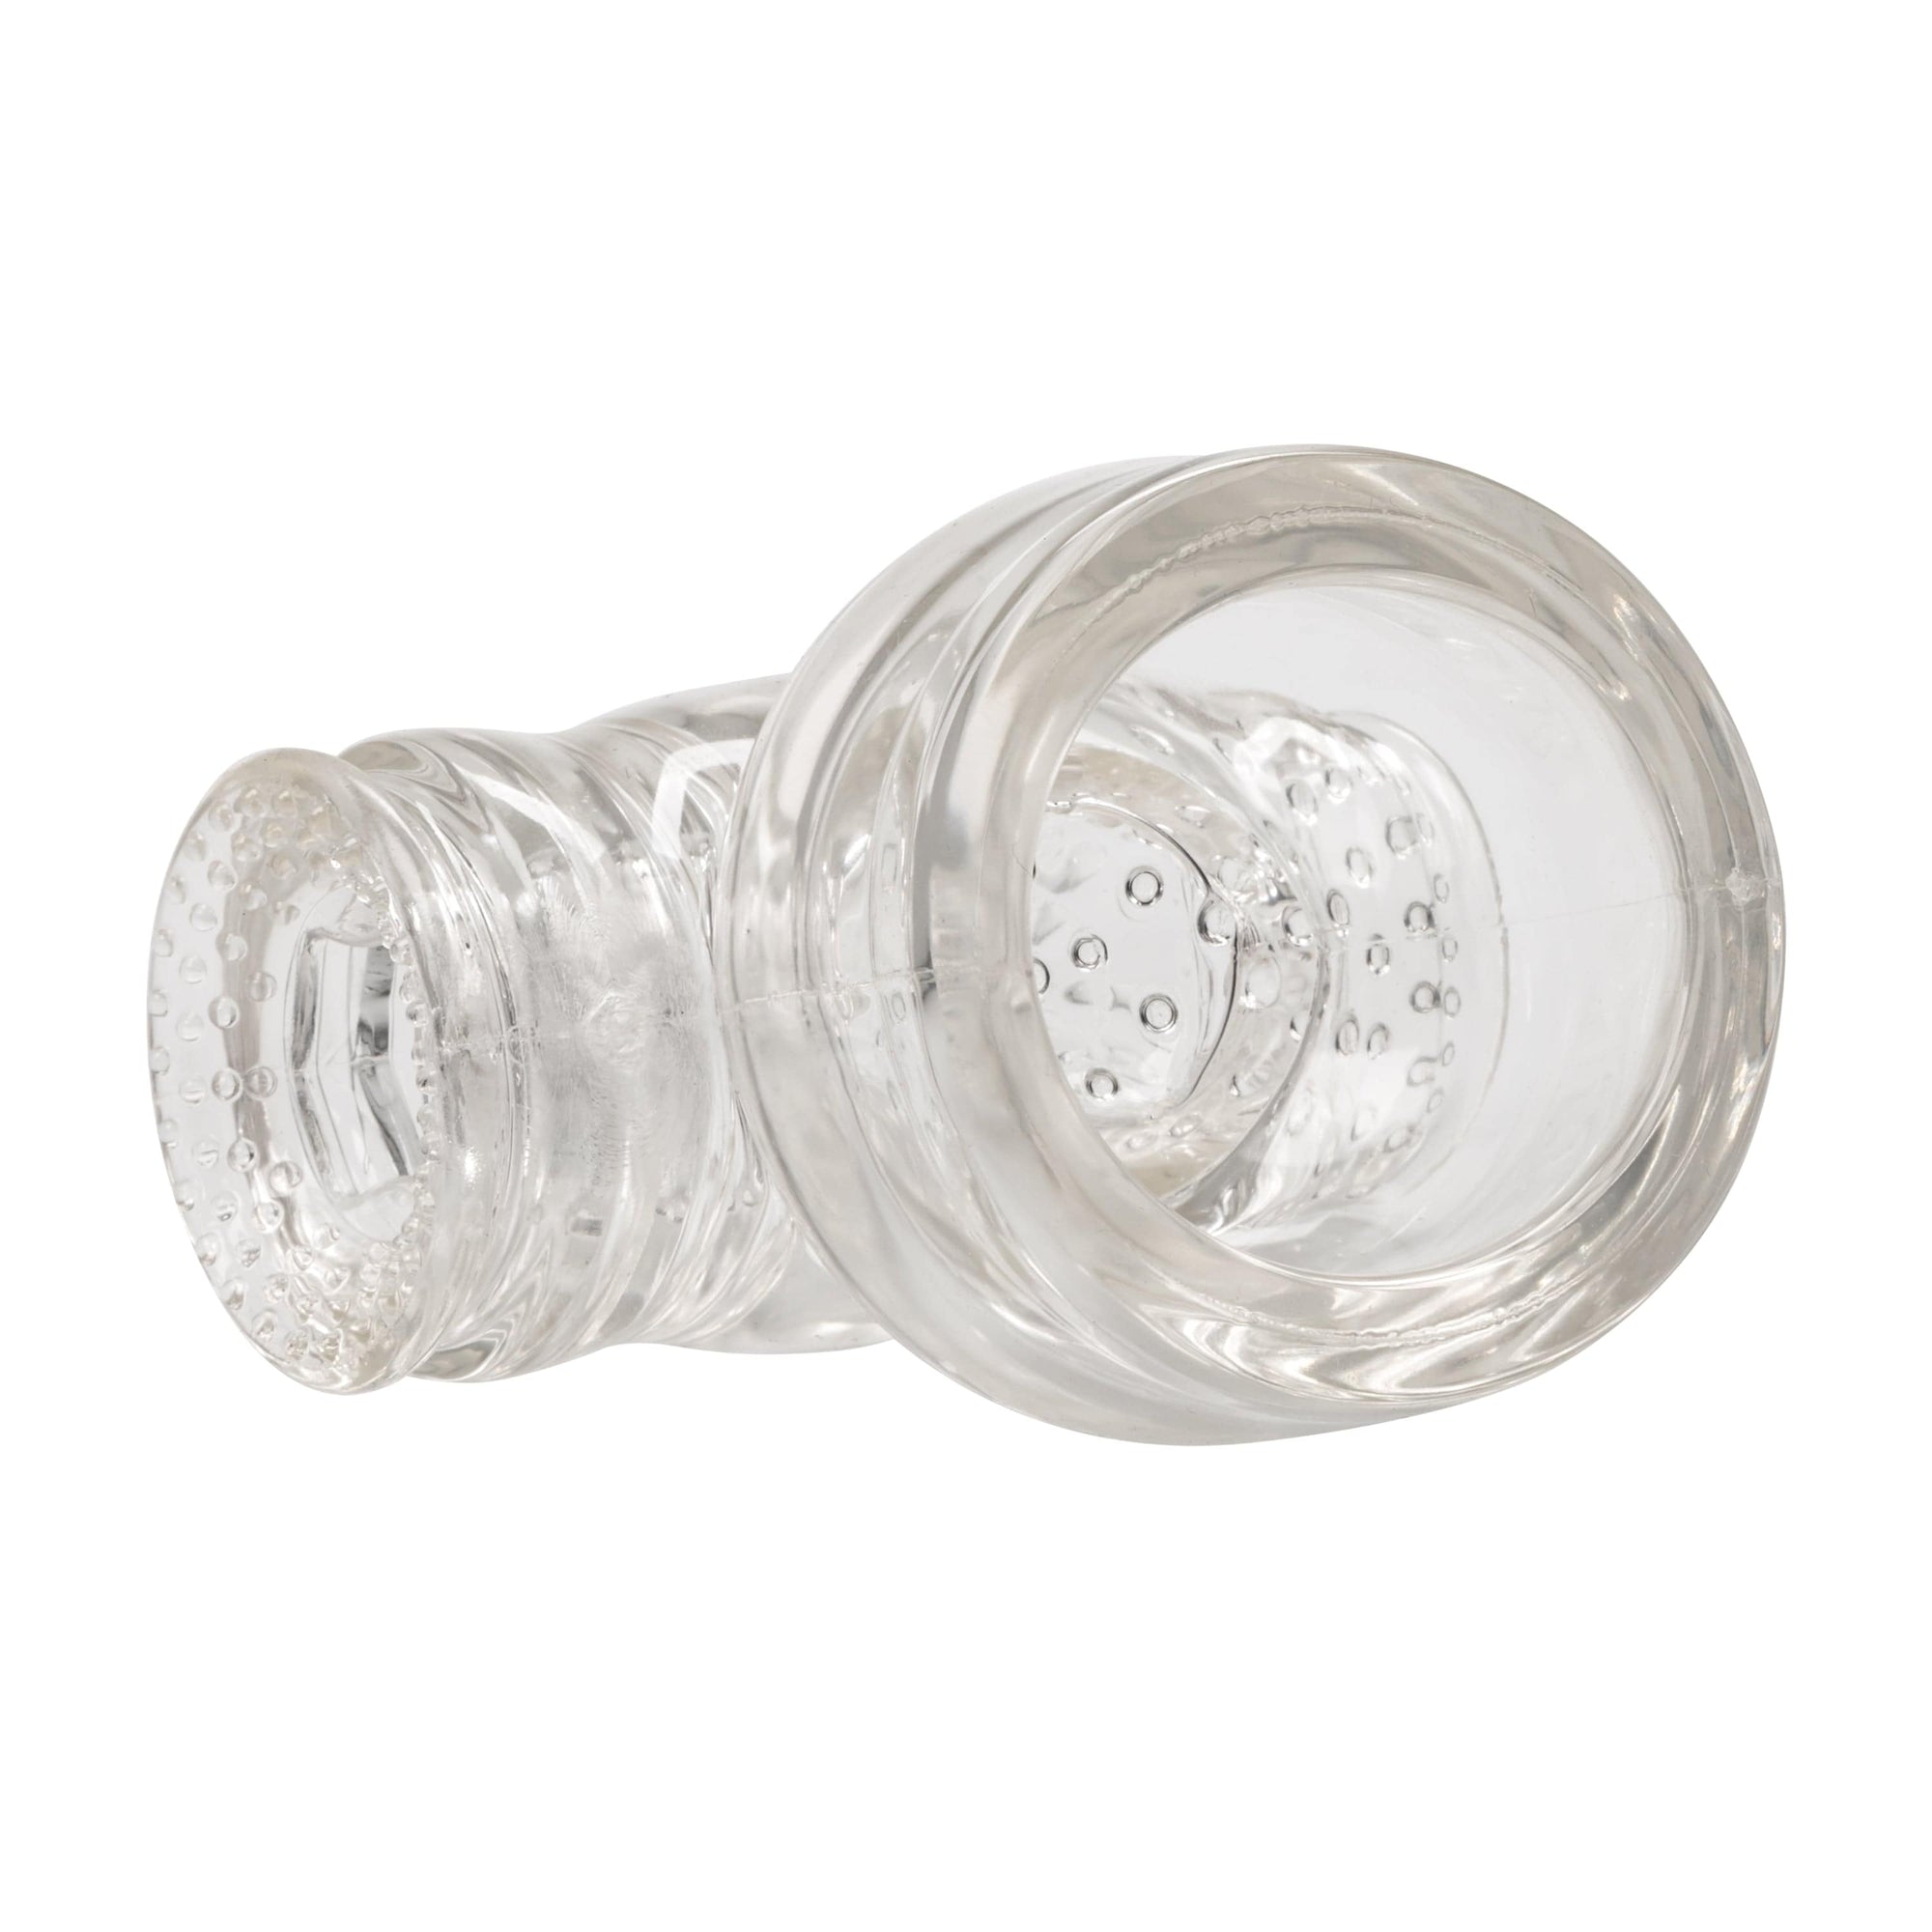 California Exotics - Miracle Massager Accessory For Him (Clear) -  Accessories  Durio.sg